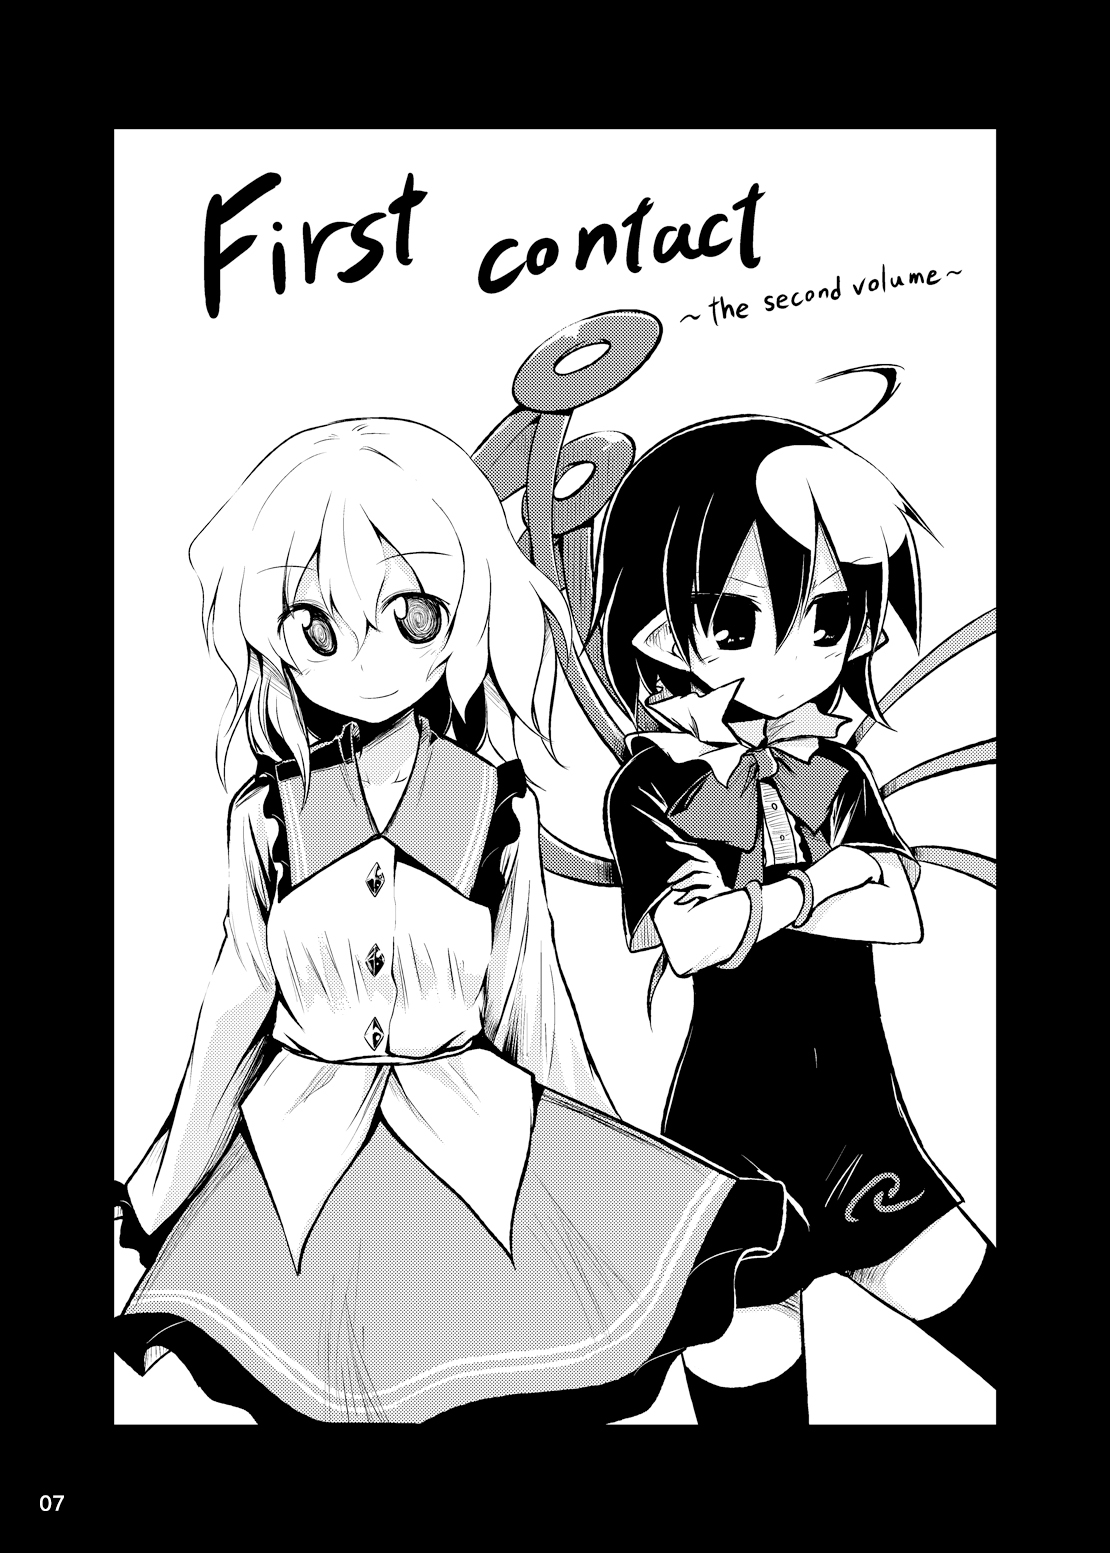 [Arutana (Chipa)] First contact ~the second volume~ (Touhou Project) [Digital] 4